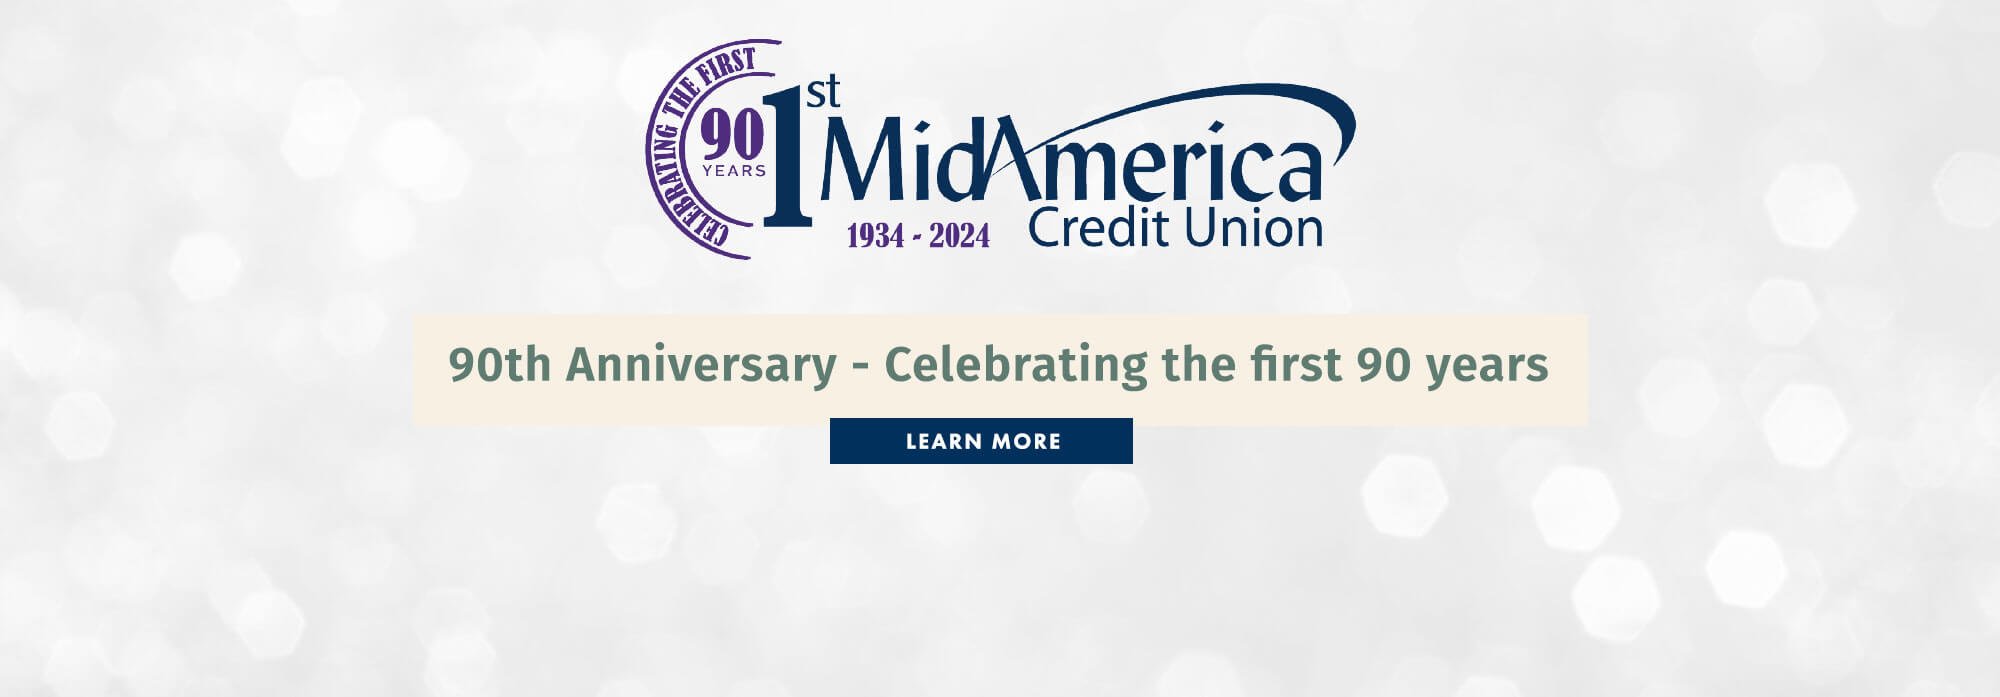 90th Anniversary - Celebrating the first 90 years